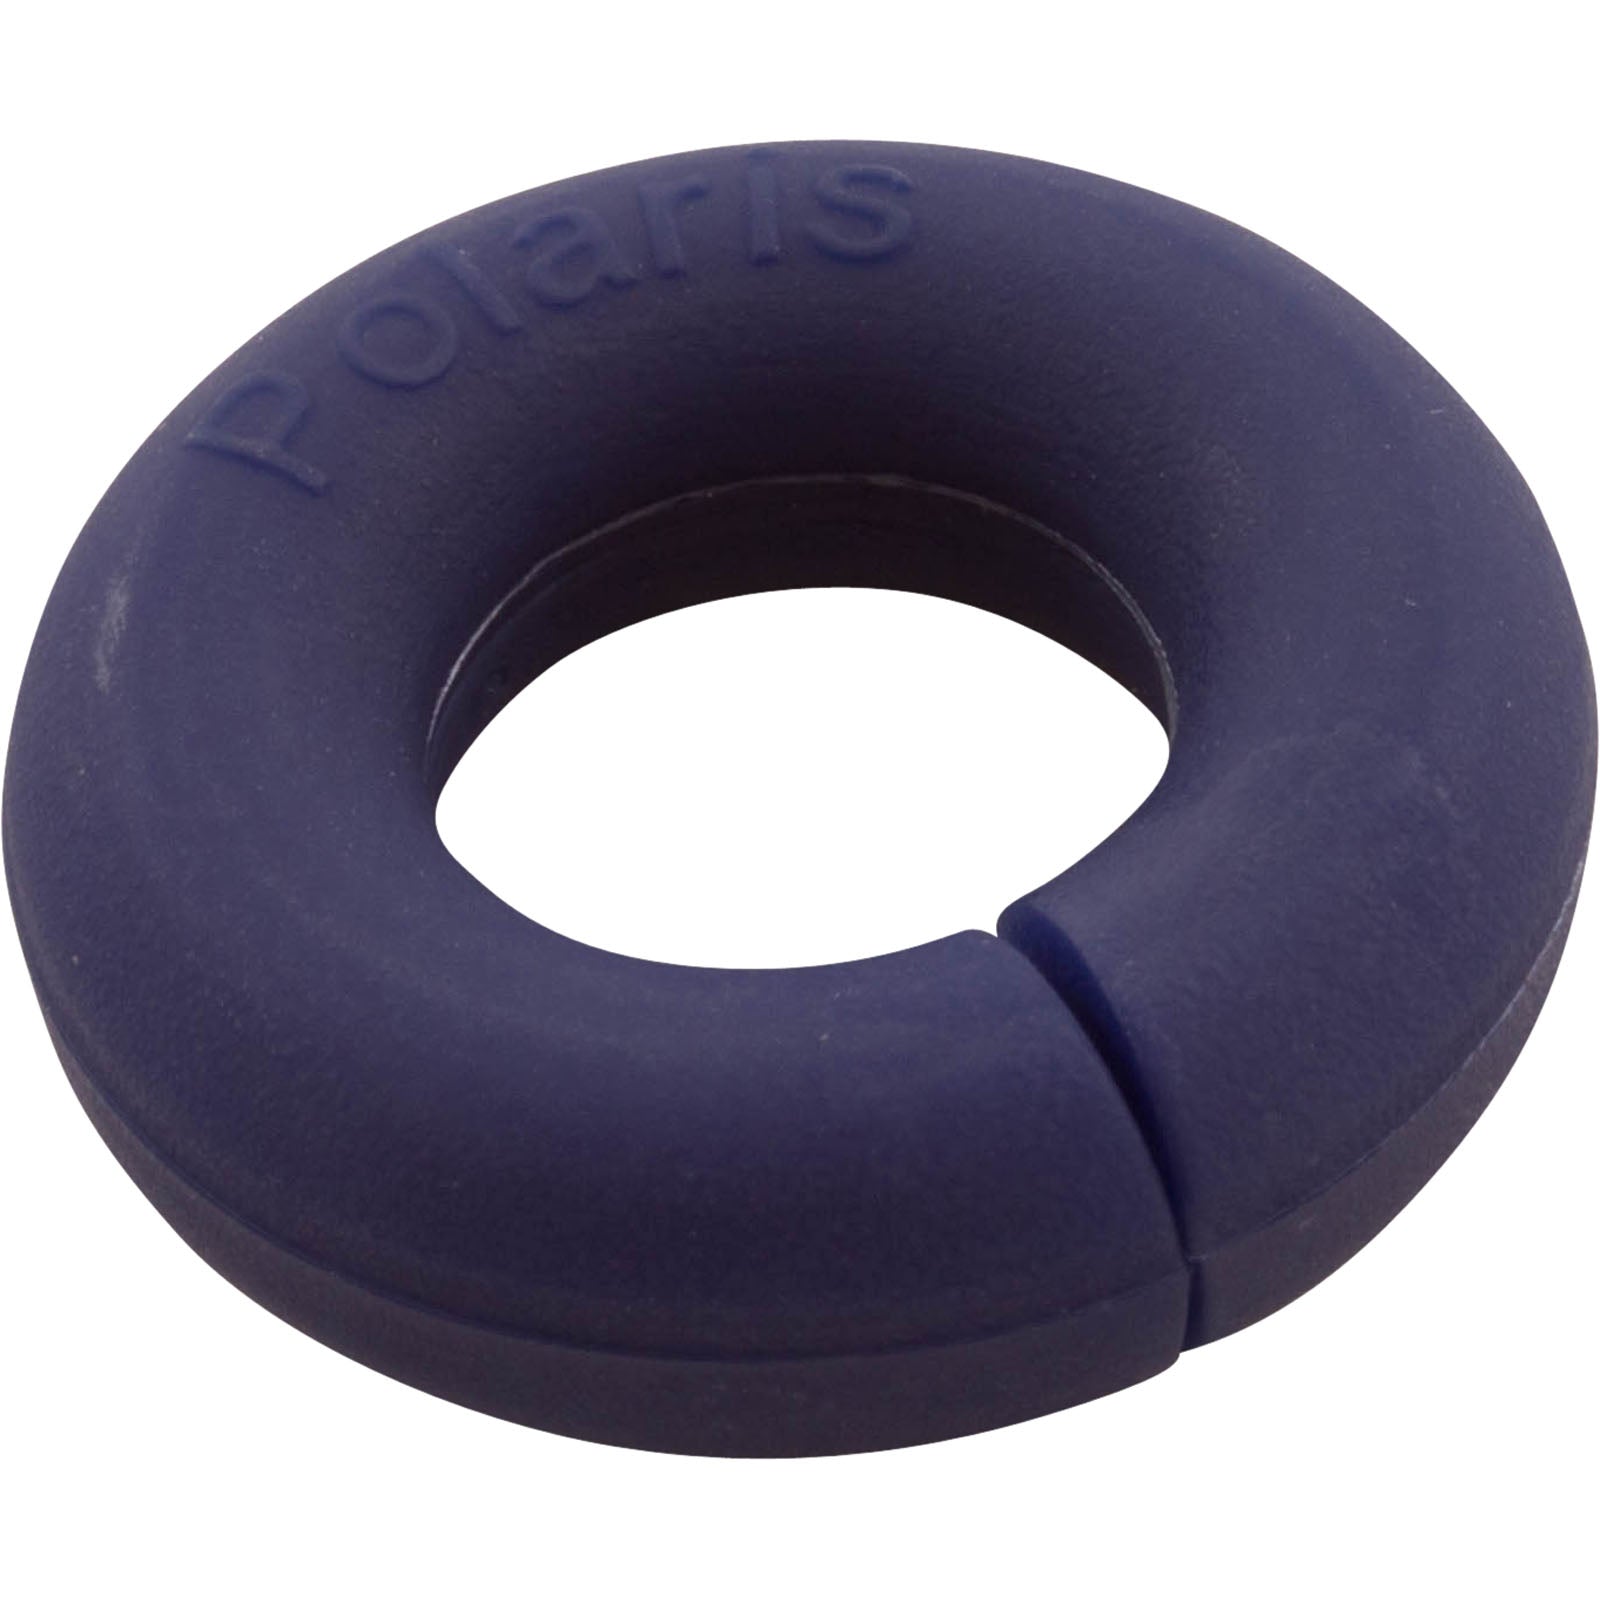 Zodiac/Polaris 39-021 Blue Sweep Hose Wear Ring for 3900 Sport Pool Cleaner